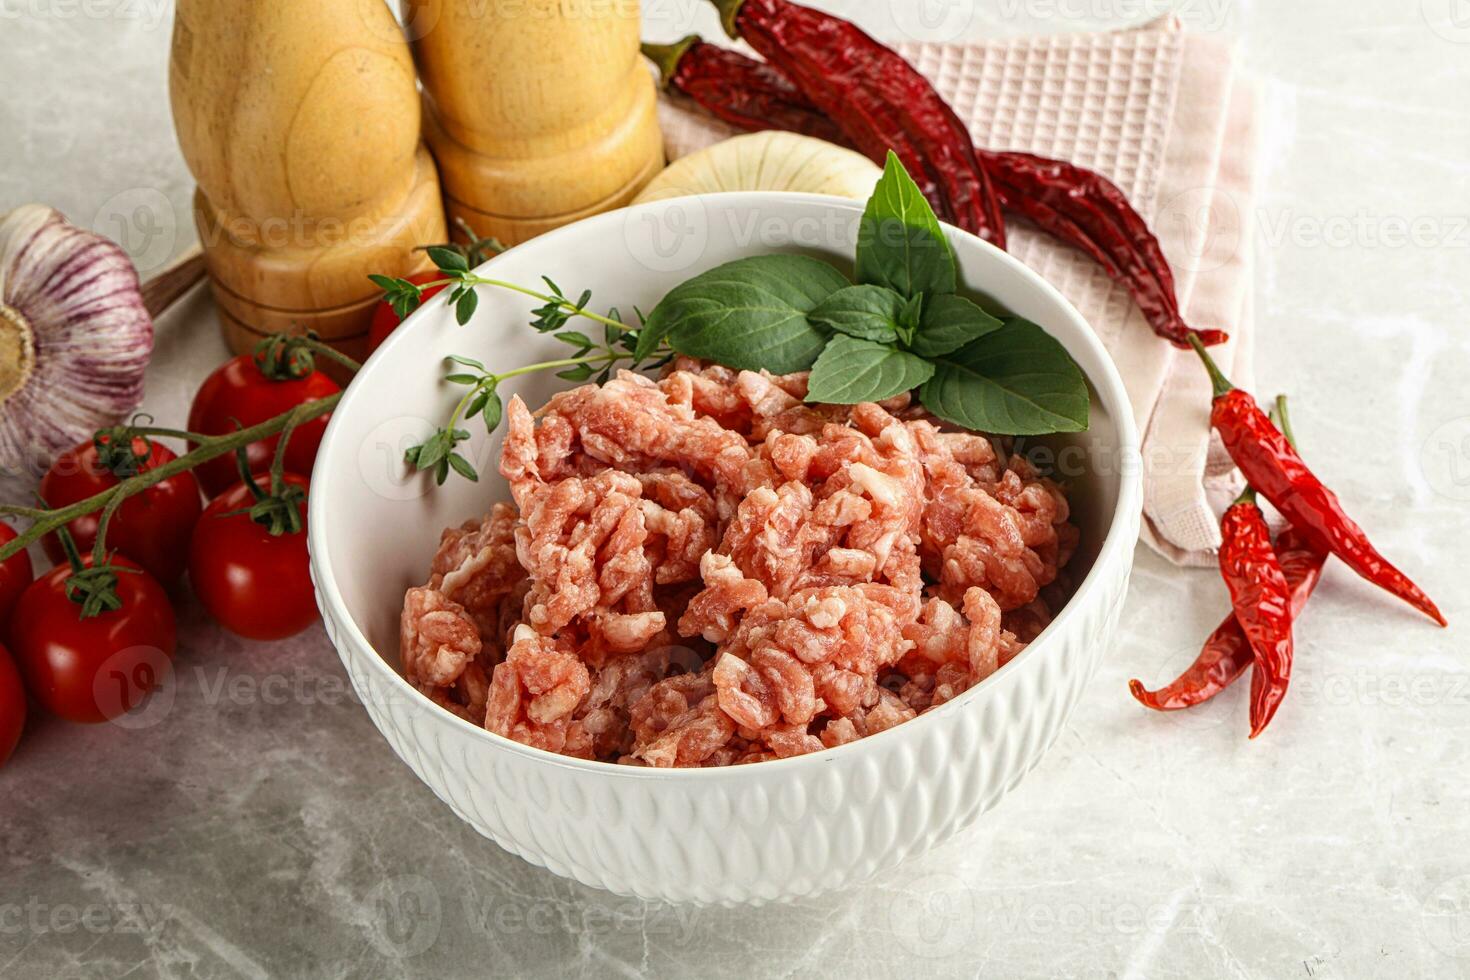 Raw minced pork uncooked meat photo